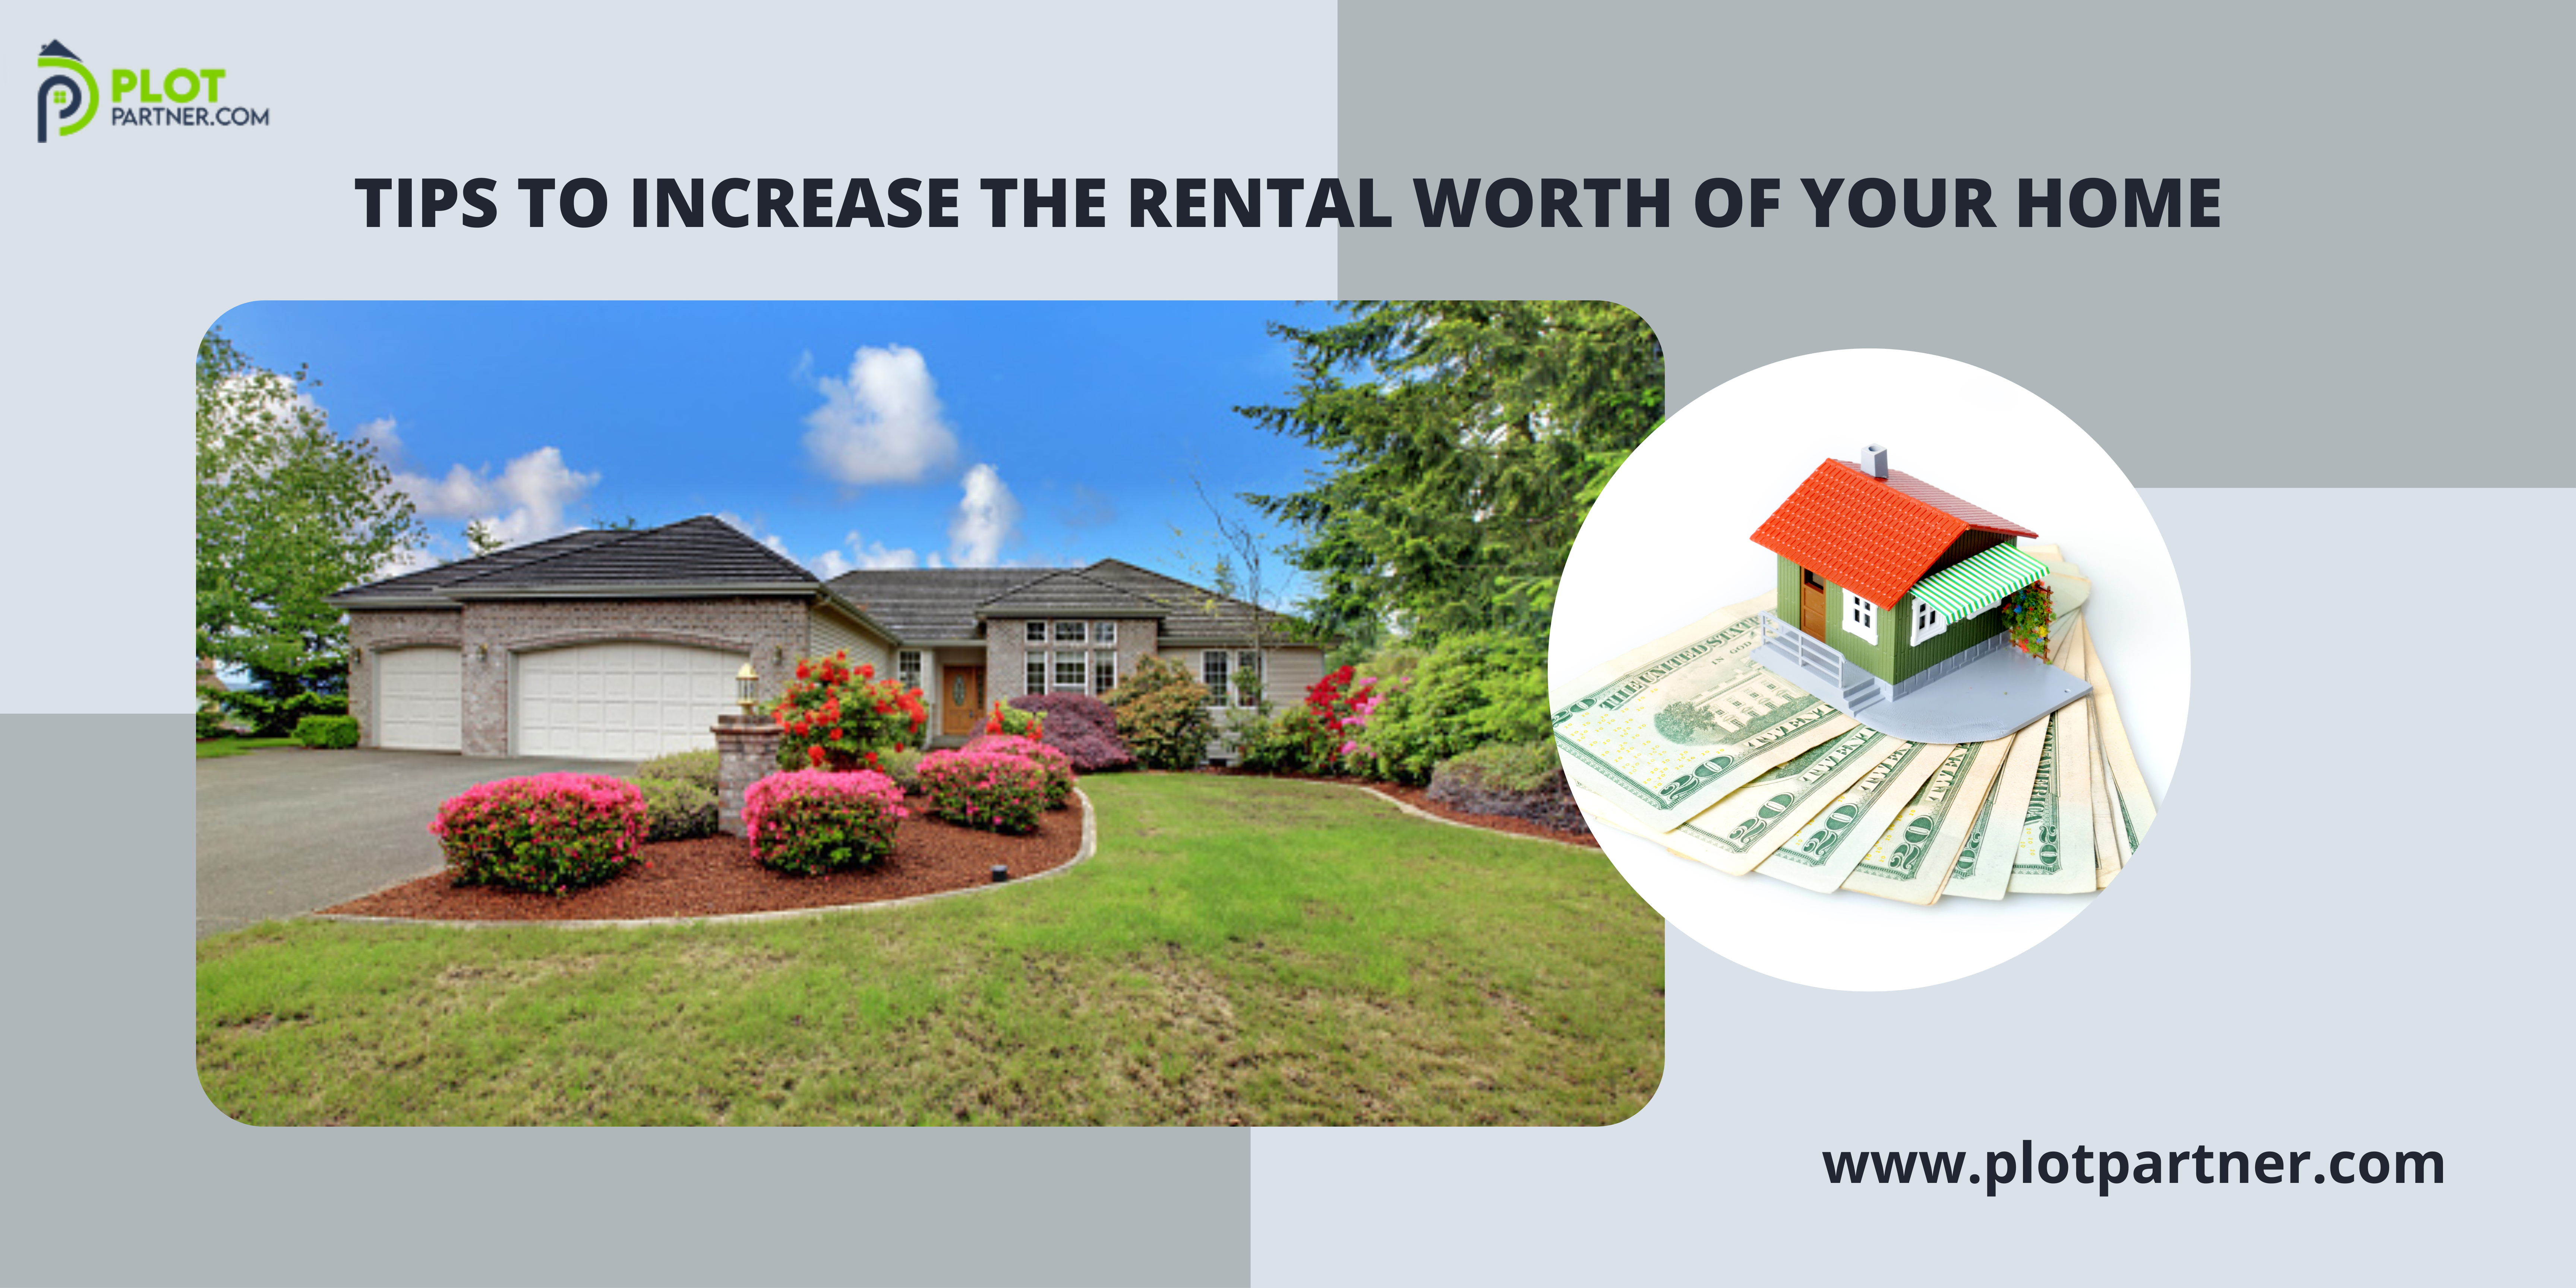 How to Increase the Rental worth of Your Home